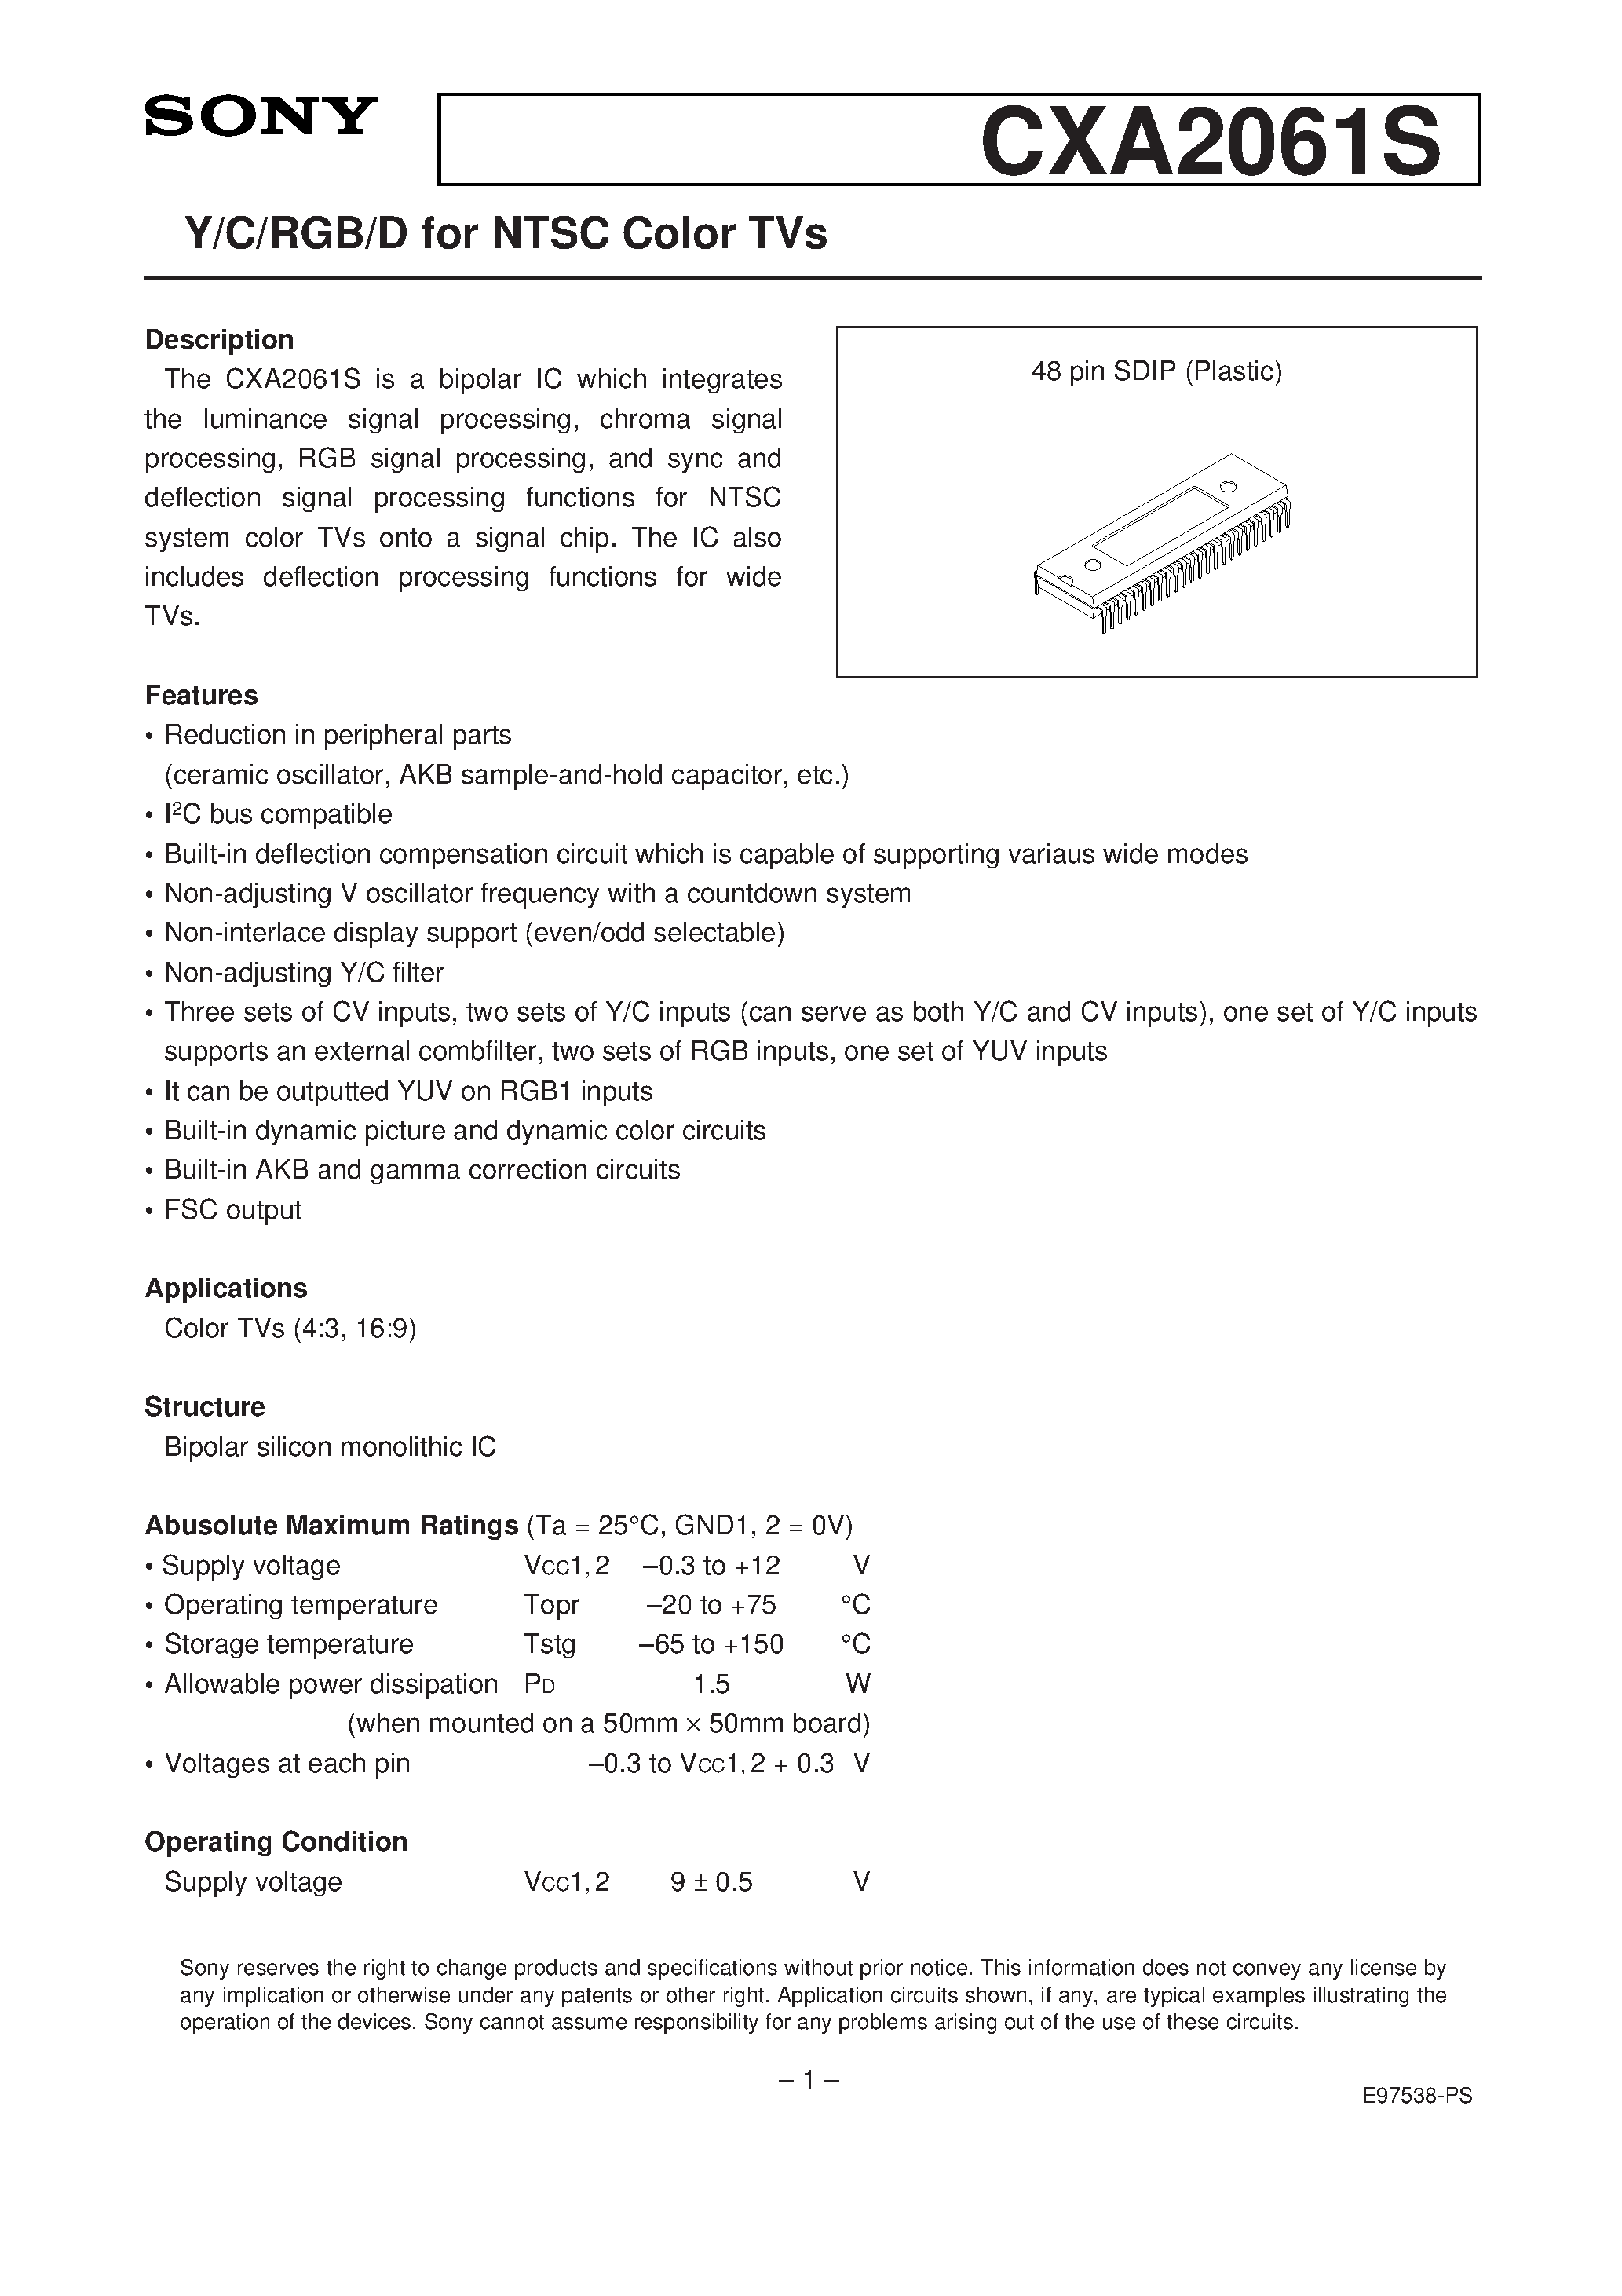 Datasheet CXA2061S - Y/C/RGB/D for NTSC Color TVs page 1